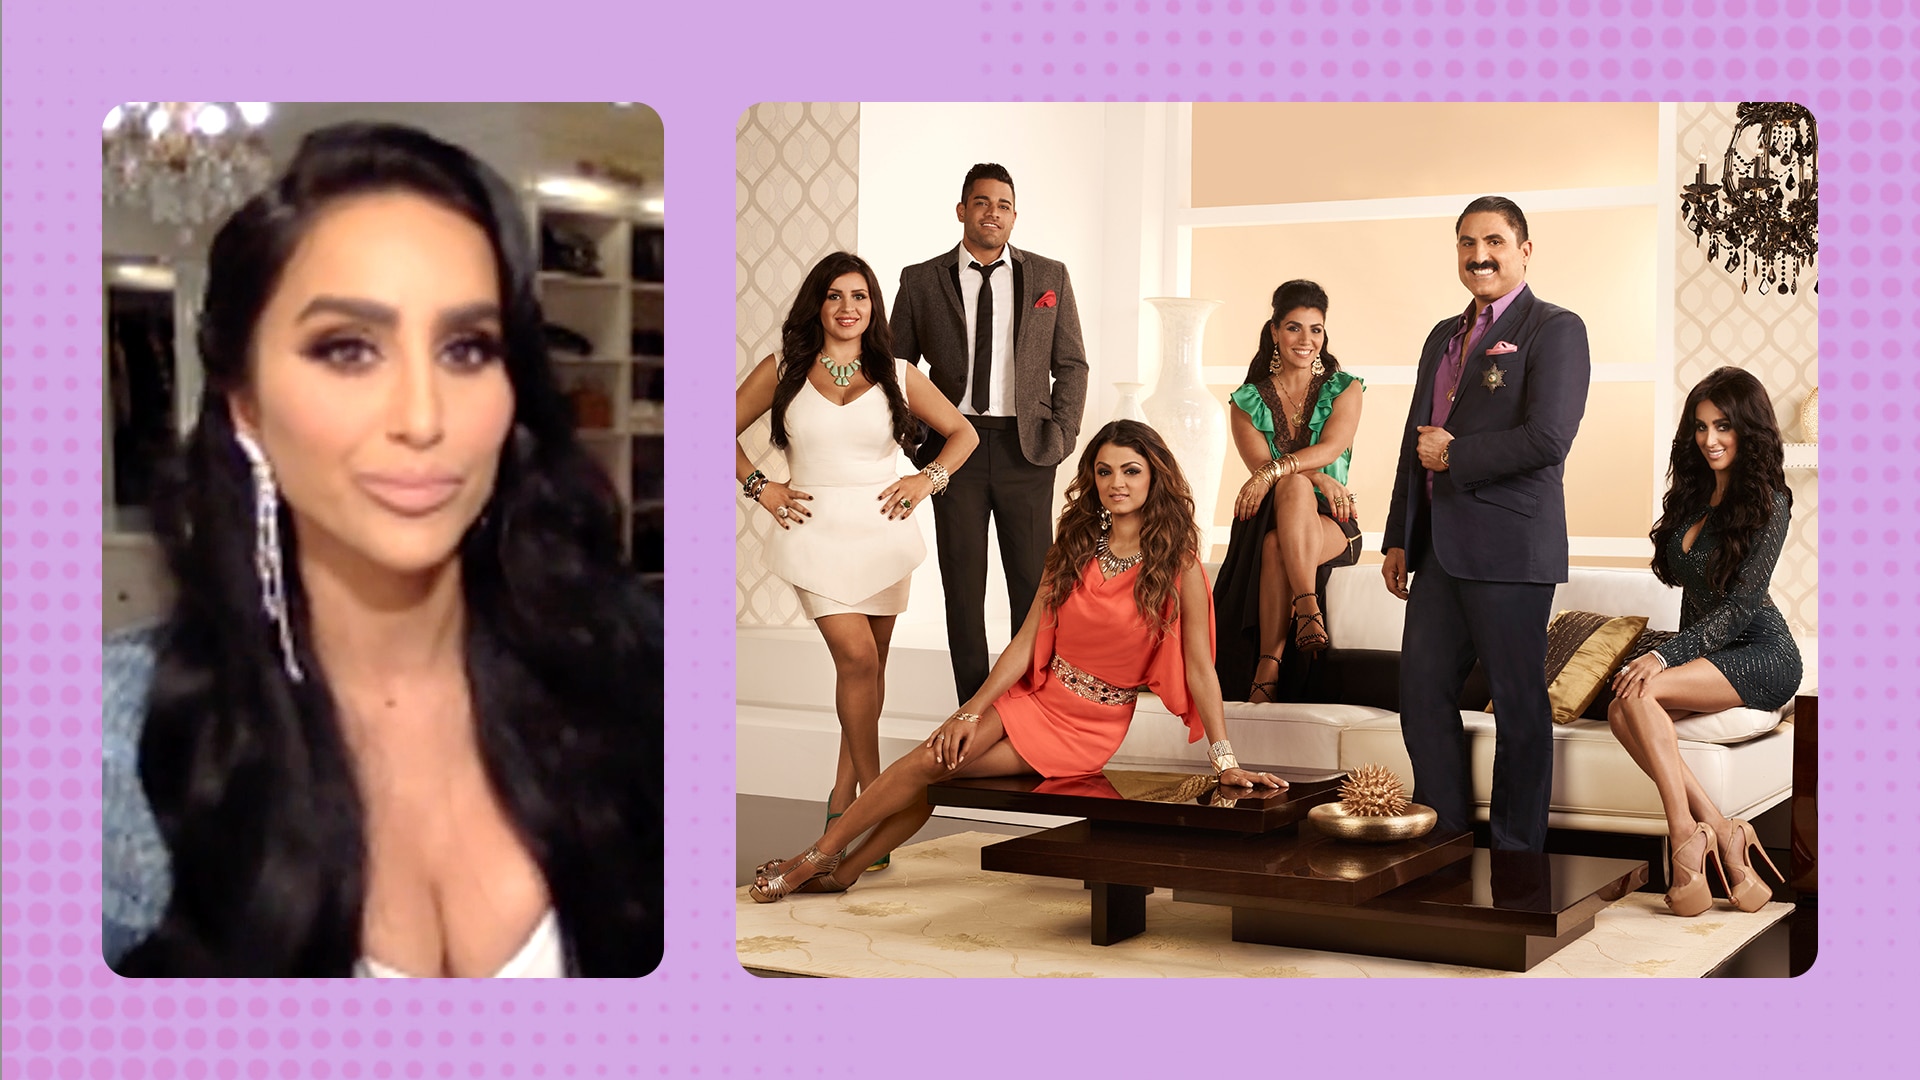 "I Never Felt Like a Part of the Group" Says Lilly Ghalichi of Joining the Shahs' Long-Time Friendships